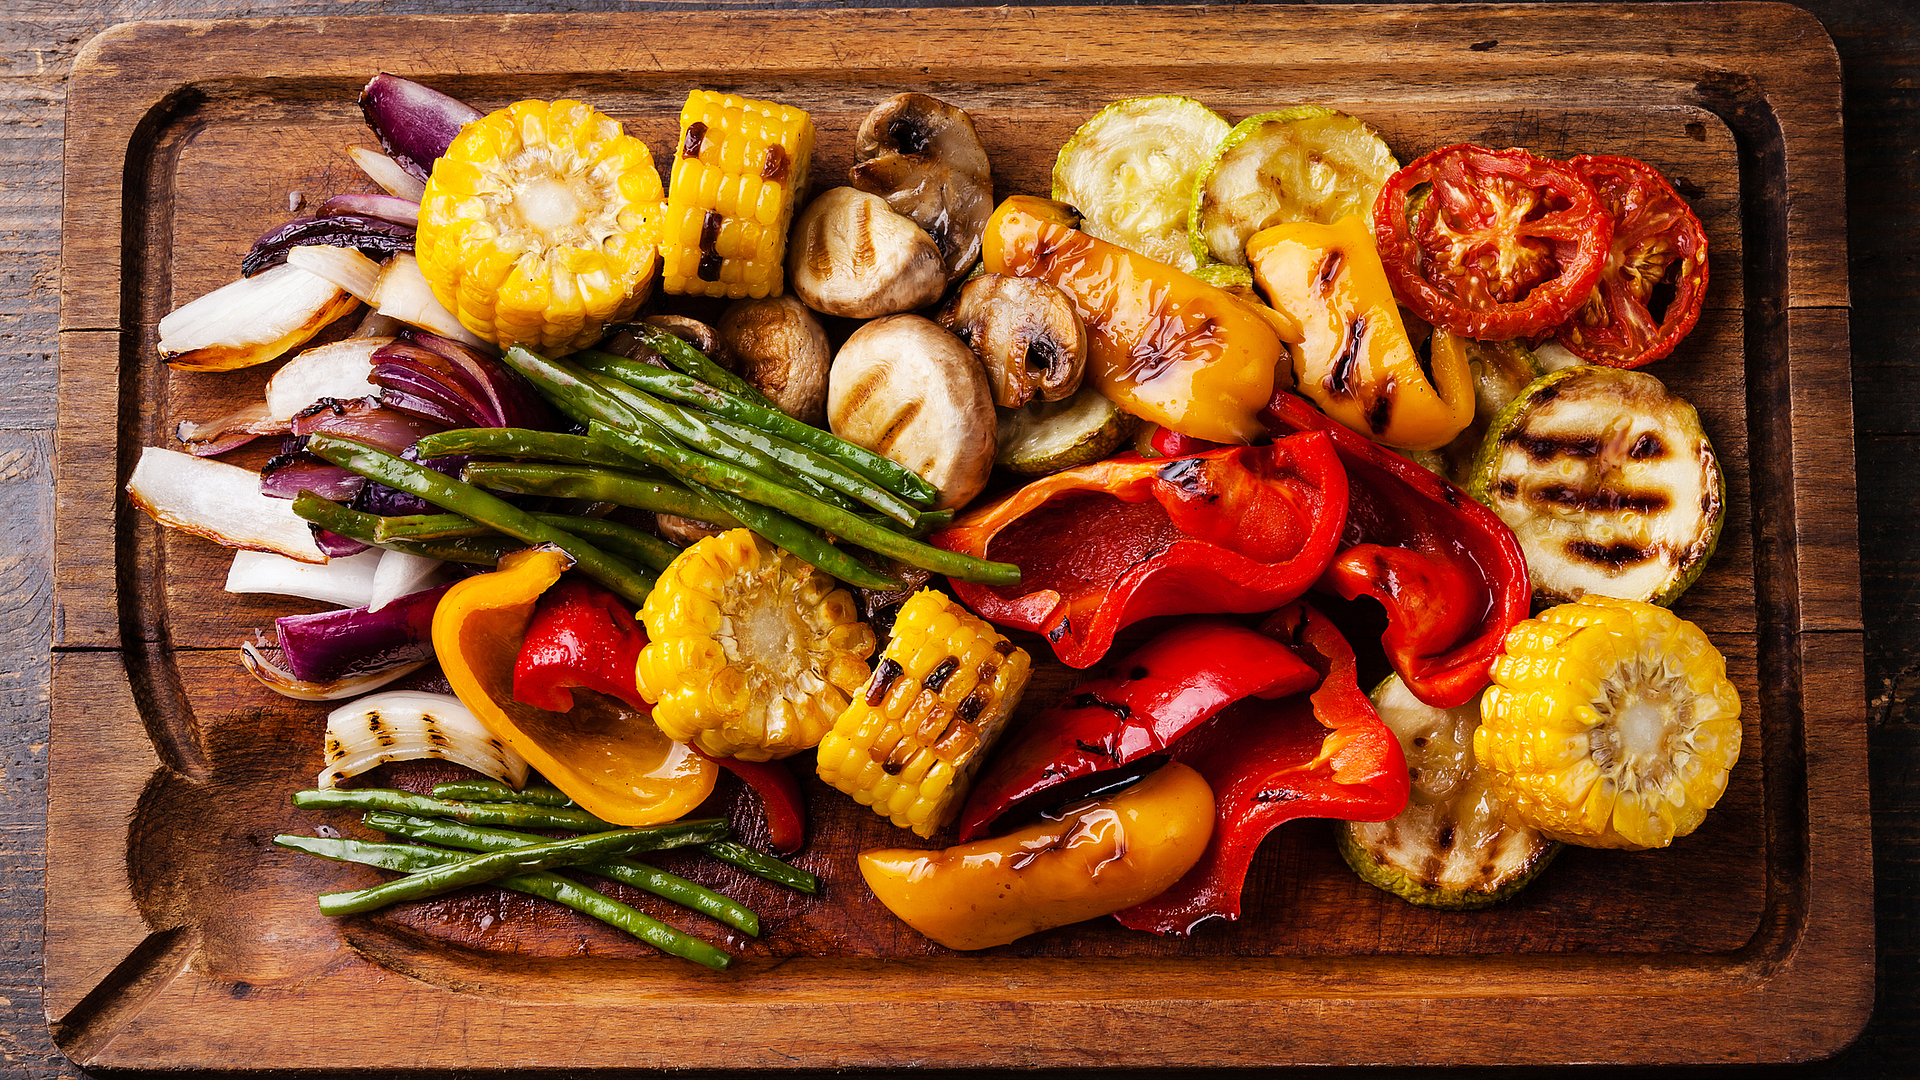 Tasty ways to barbecue without meat